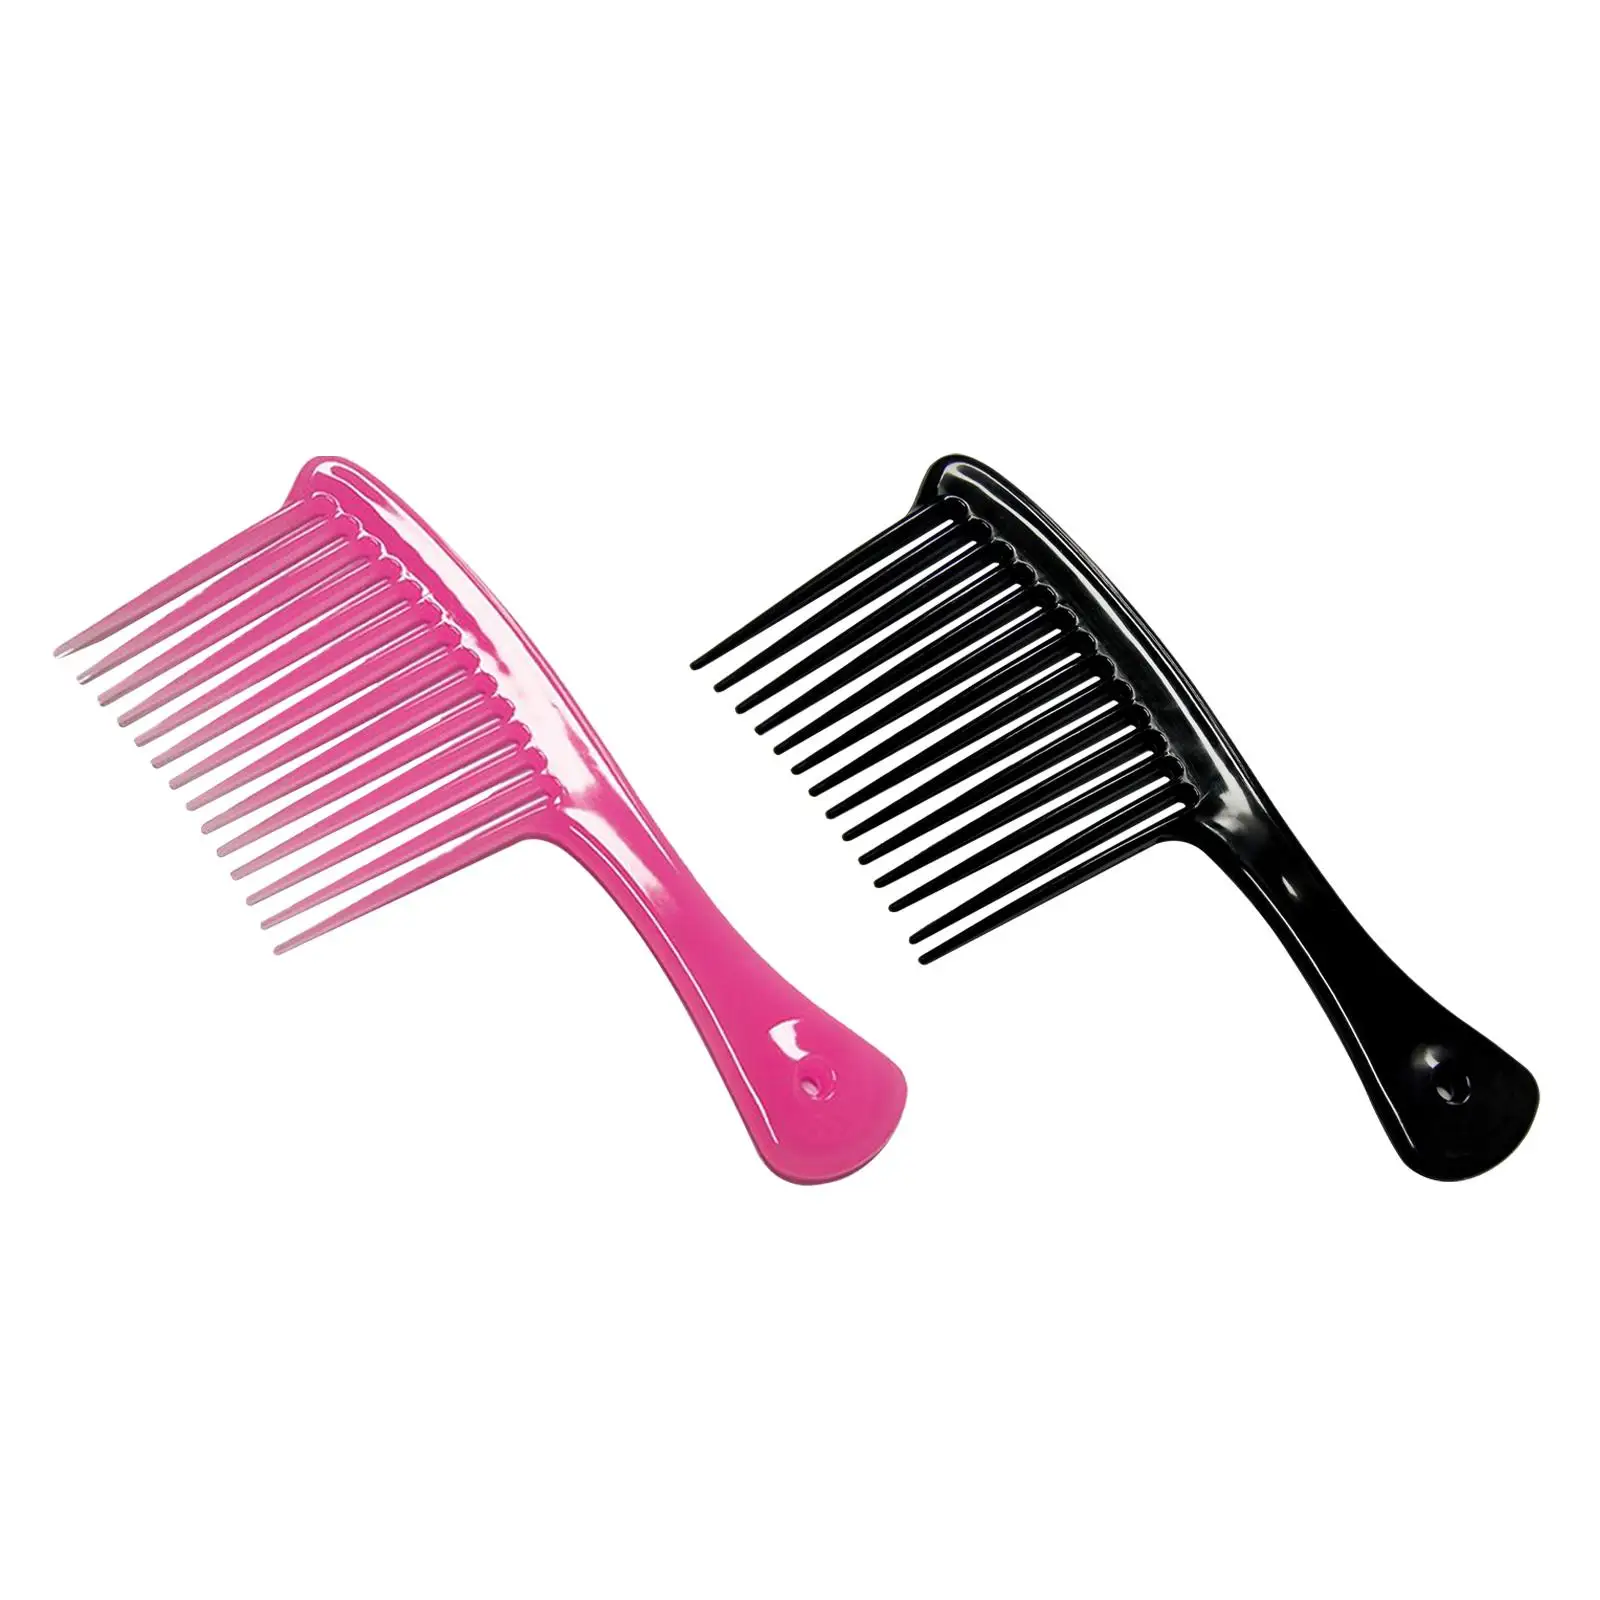 Hair Comb Large Handle Durable Portable Styling Comb Hair Styling Tool Lightweight for Curly Wet Dry Long Thick Hair Home Salon